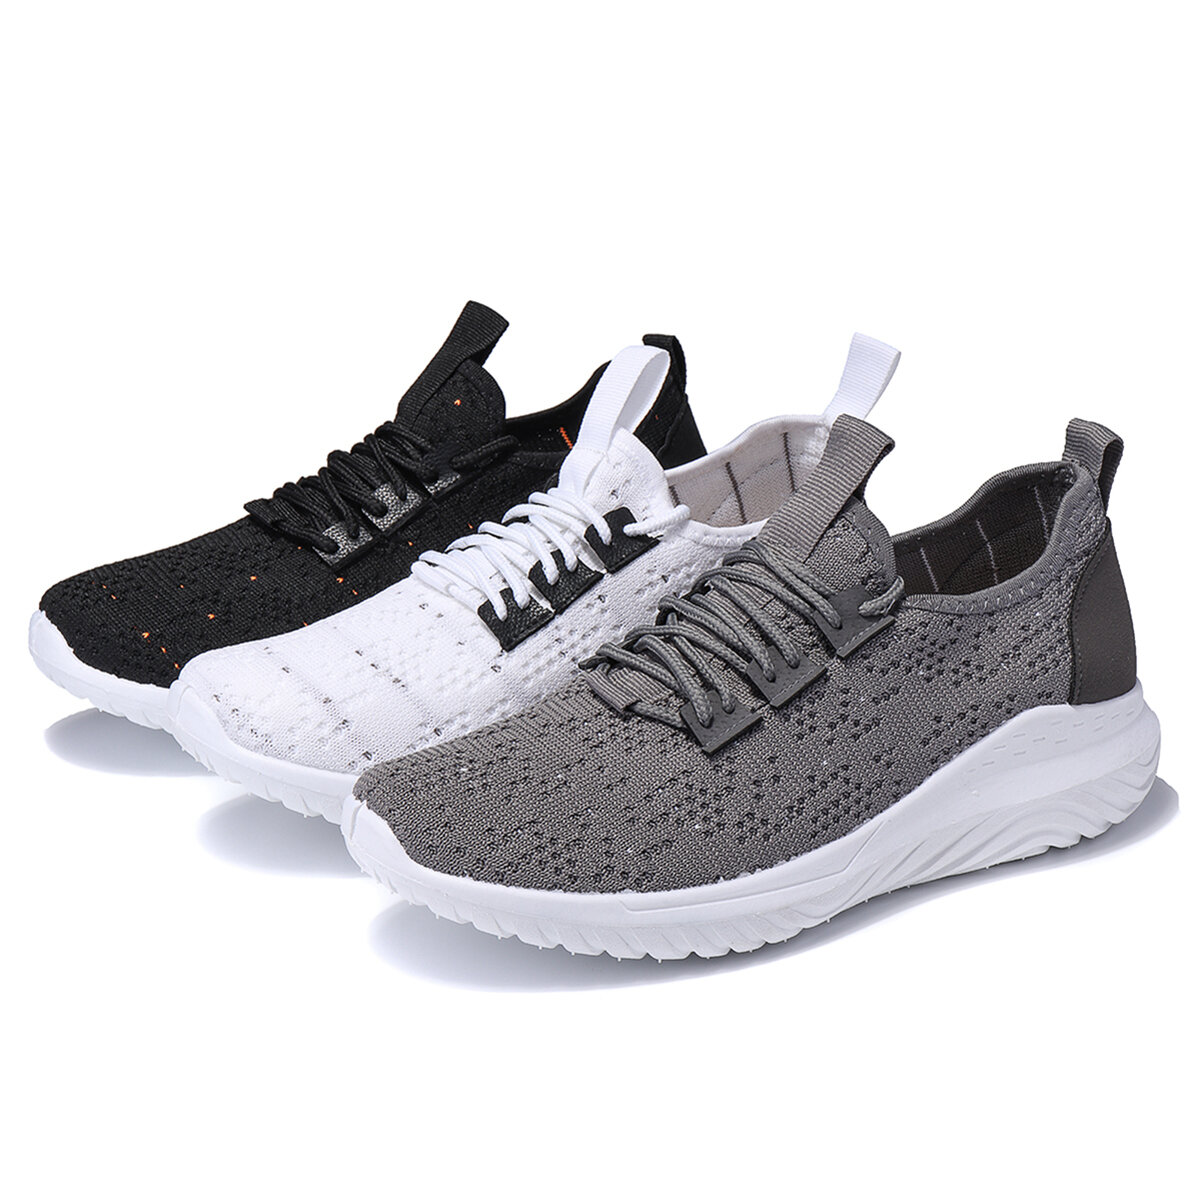 Men's Super Ultralight Sneakers Mesh Breathable Fly Weave Outdoor Sports Casual Shoes